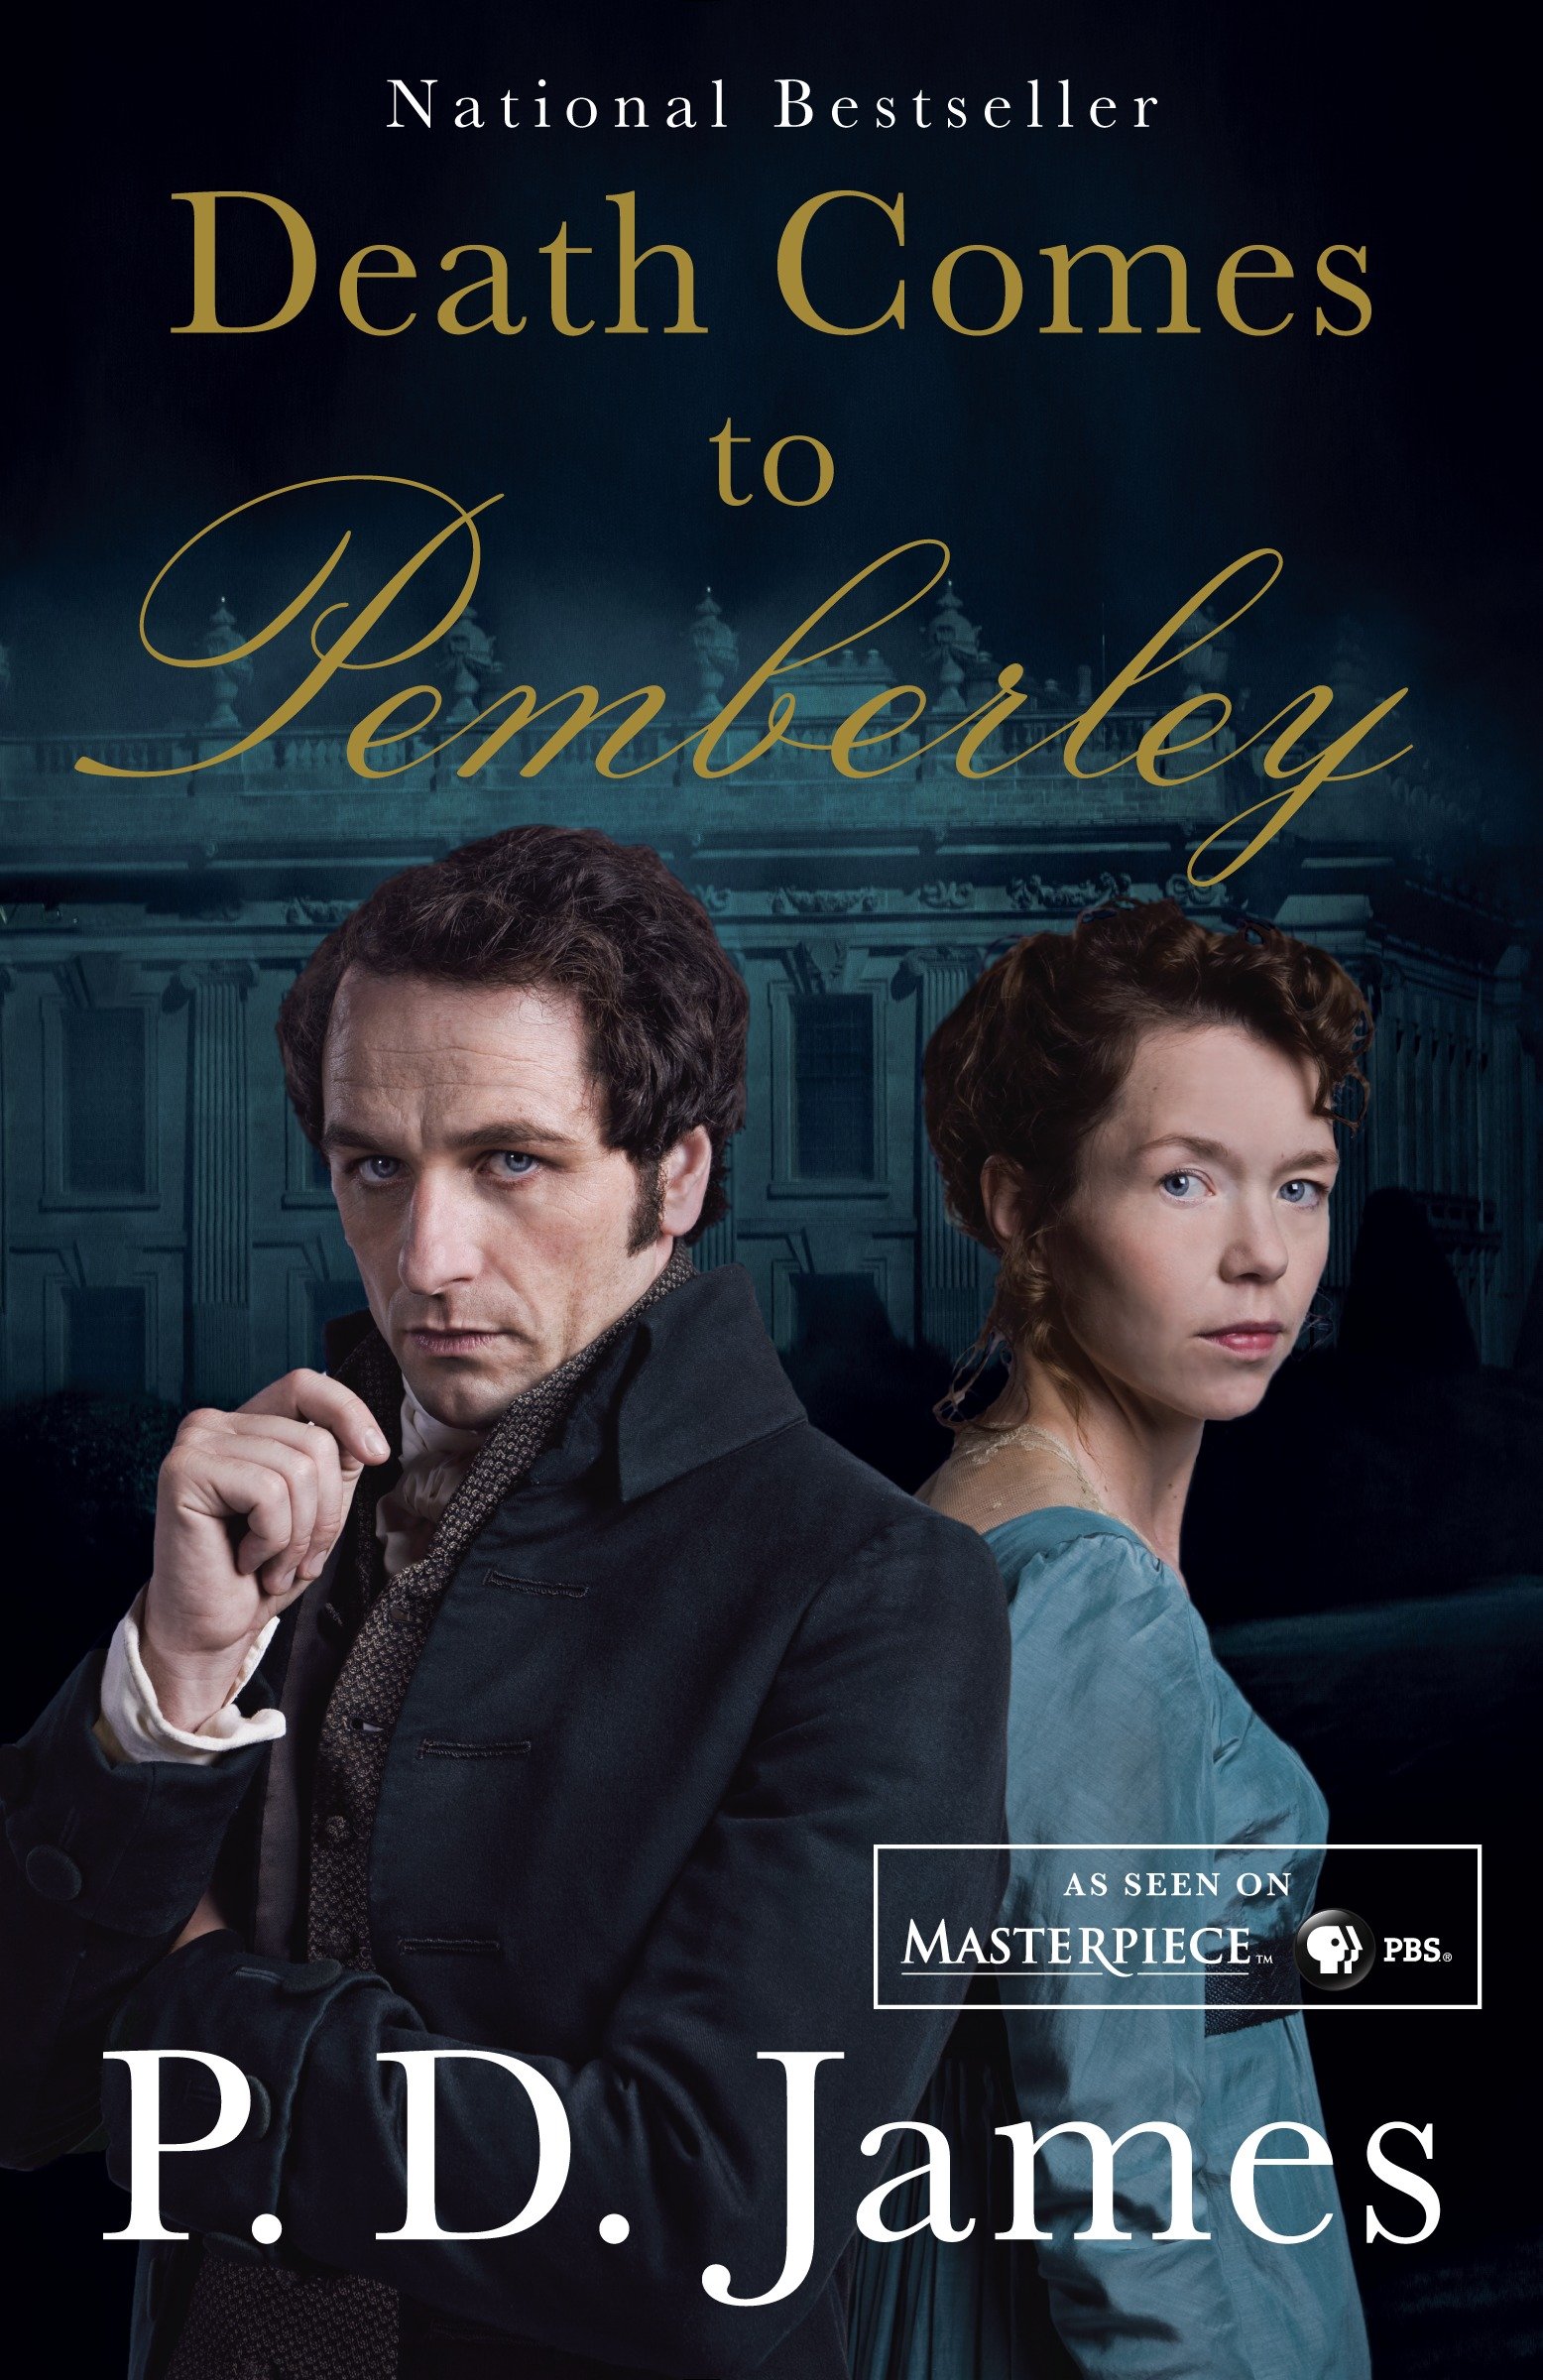 Death comes to pemberley cover image